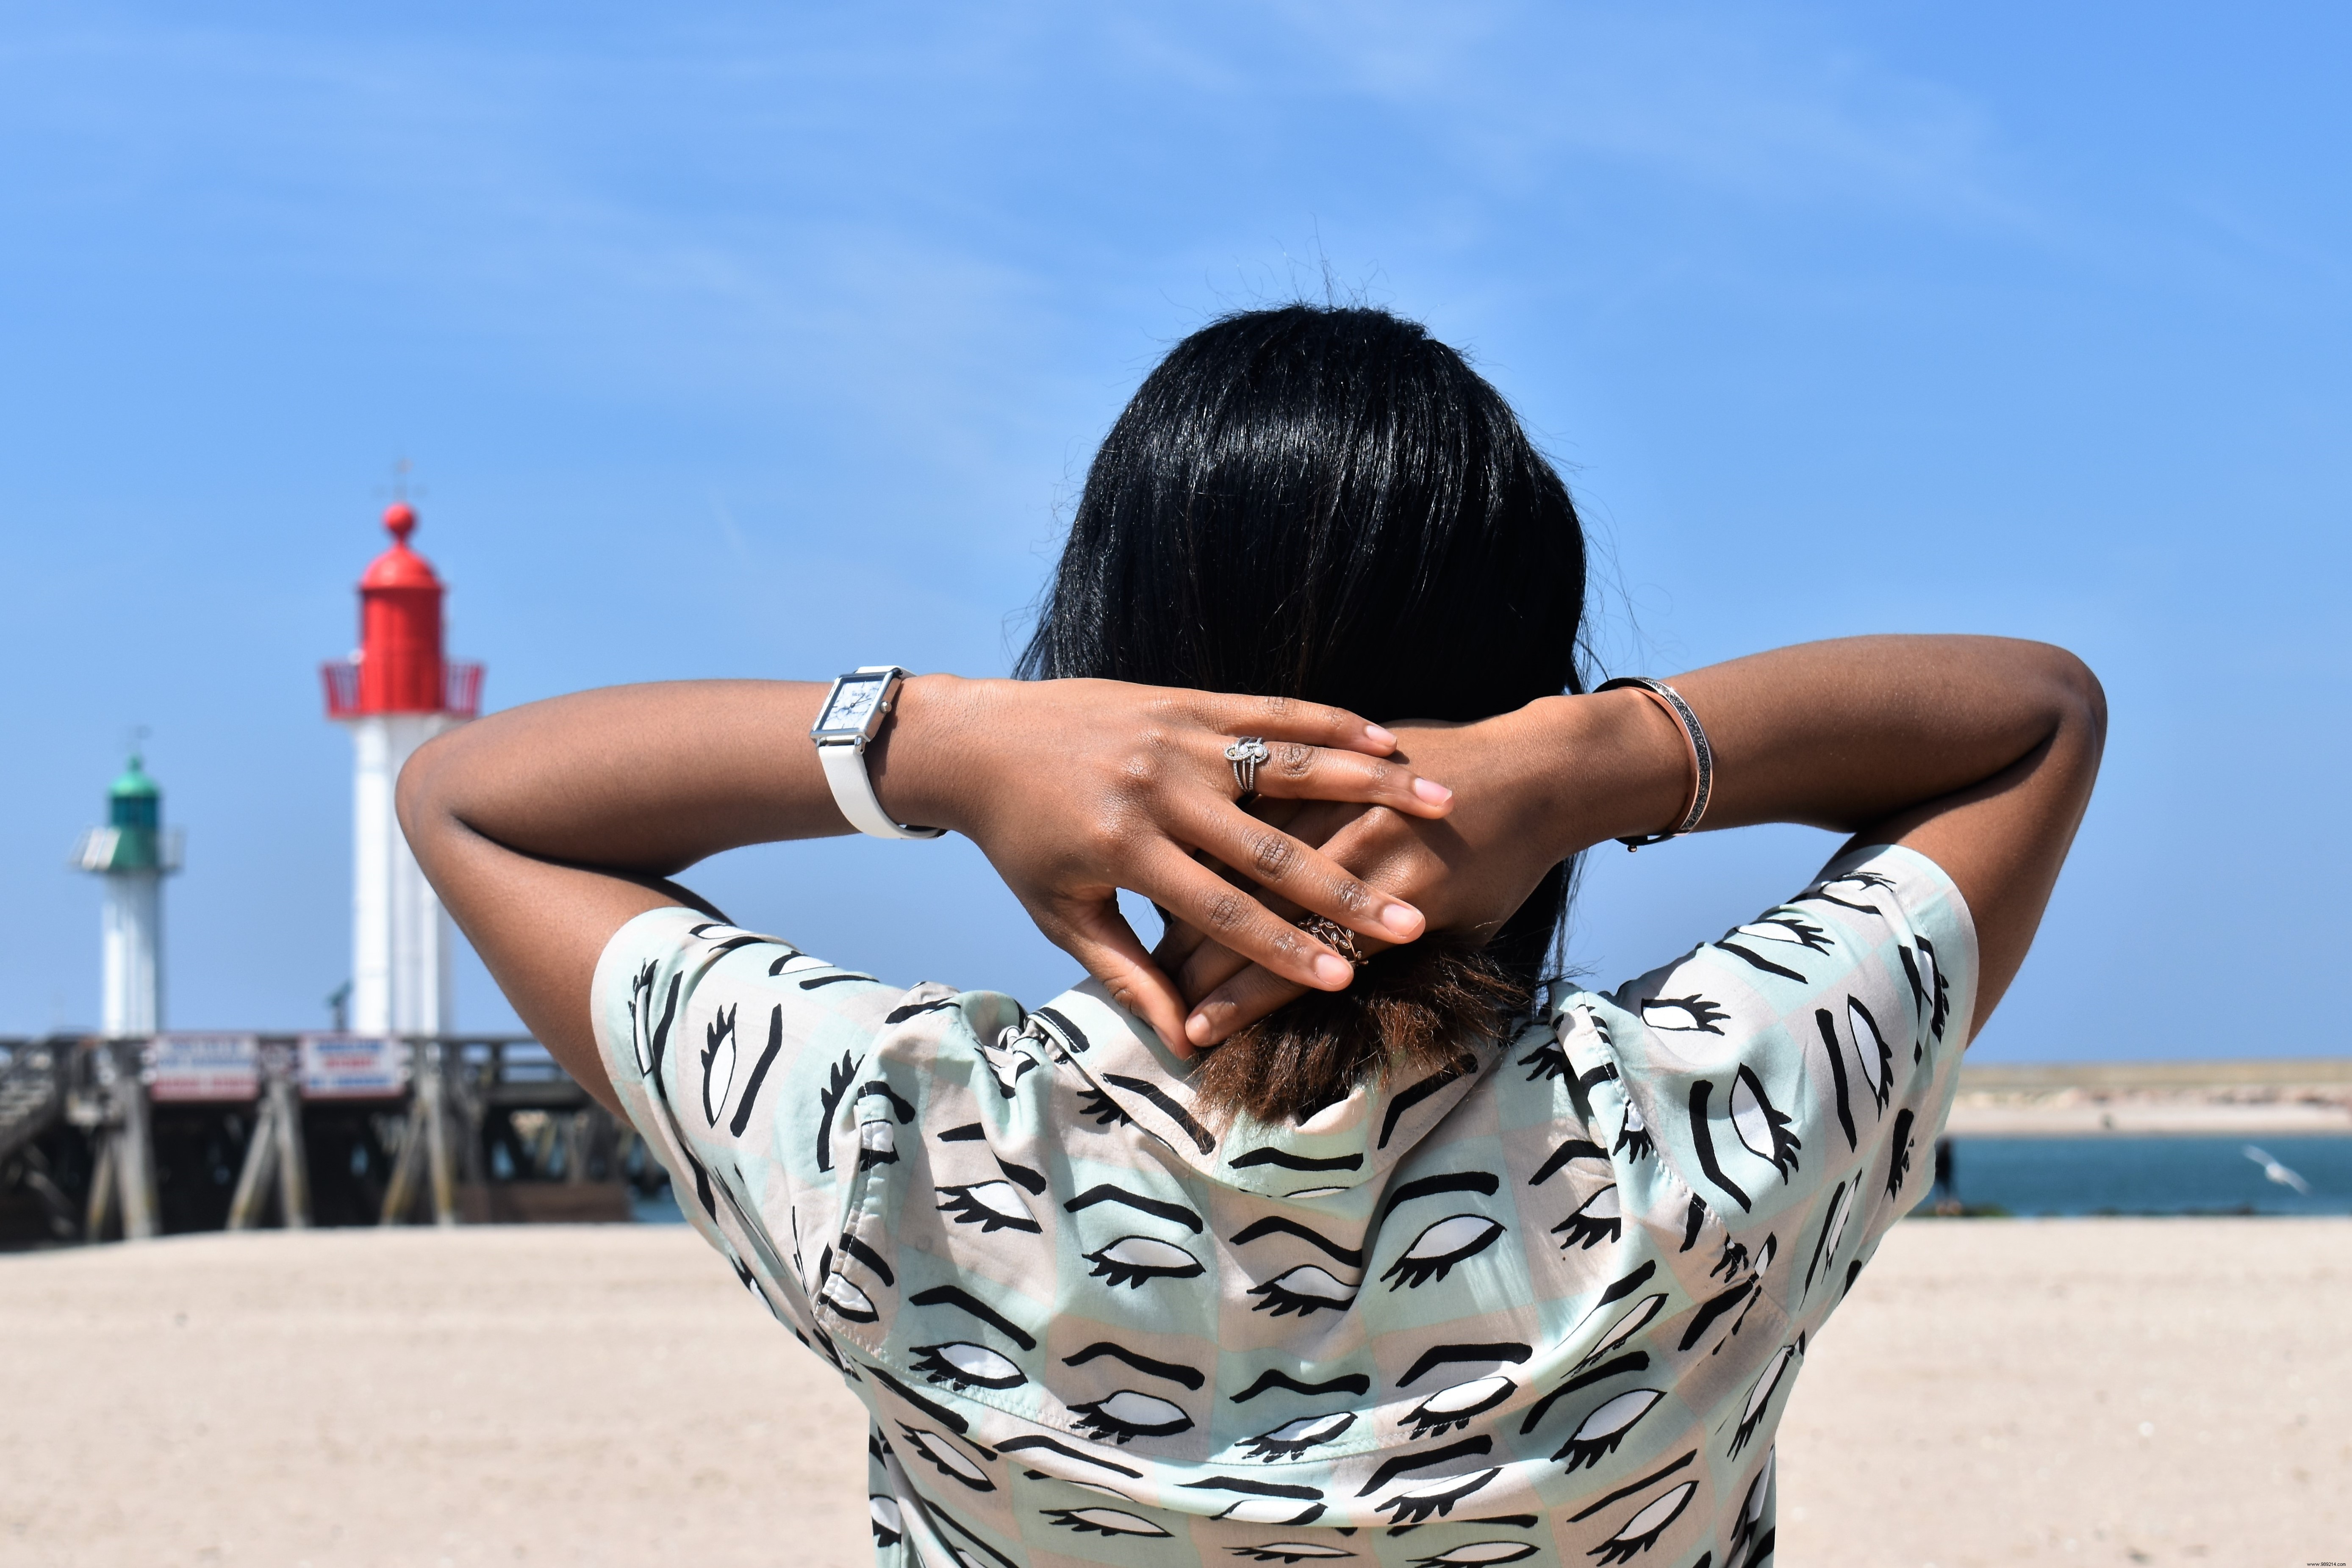 Trouville – My fashion look at the beach! 